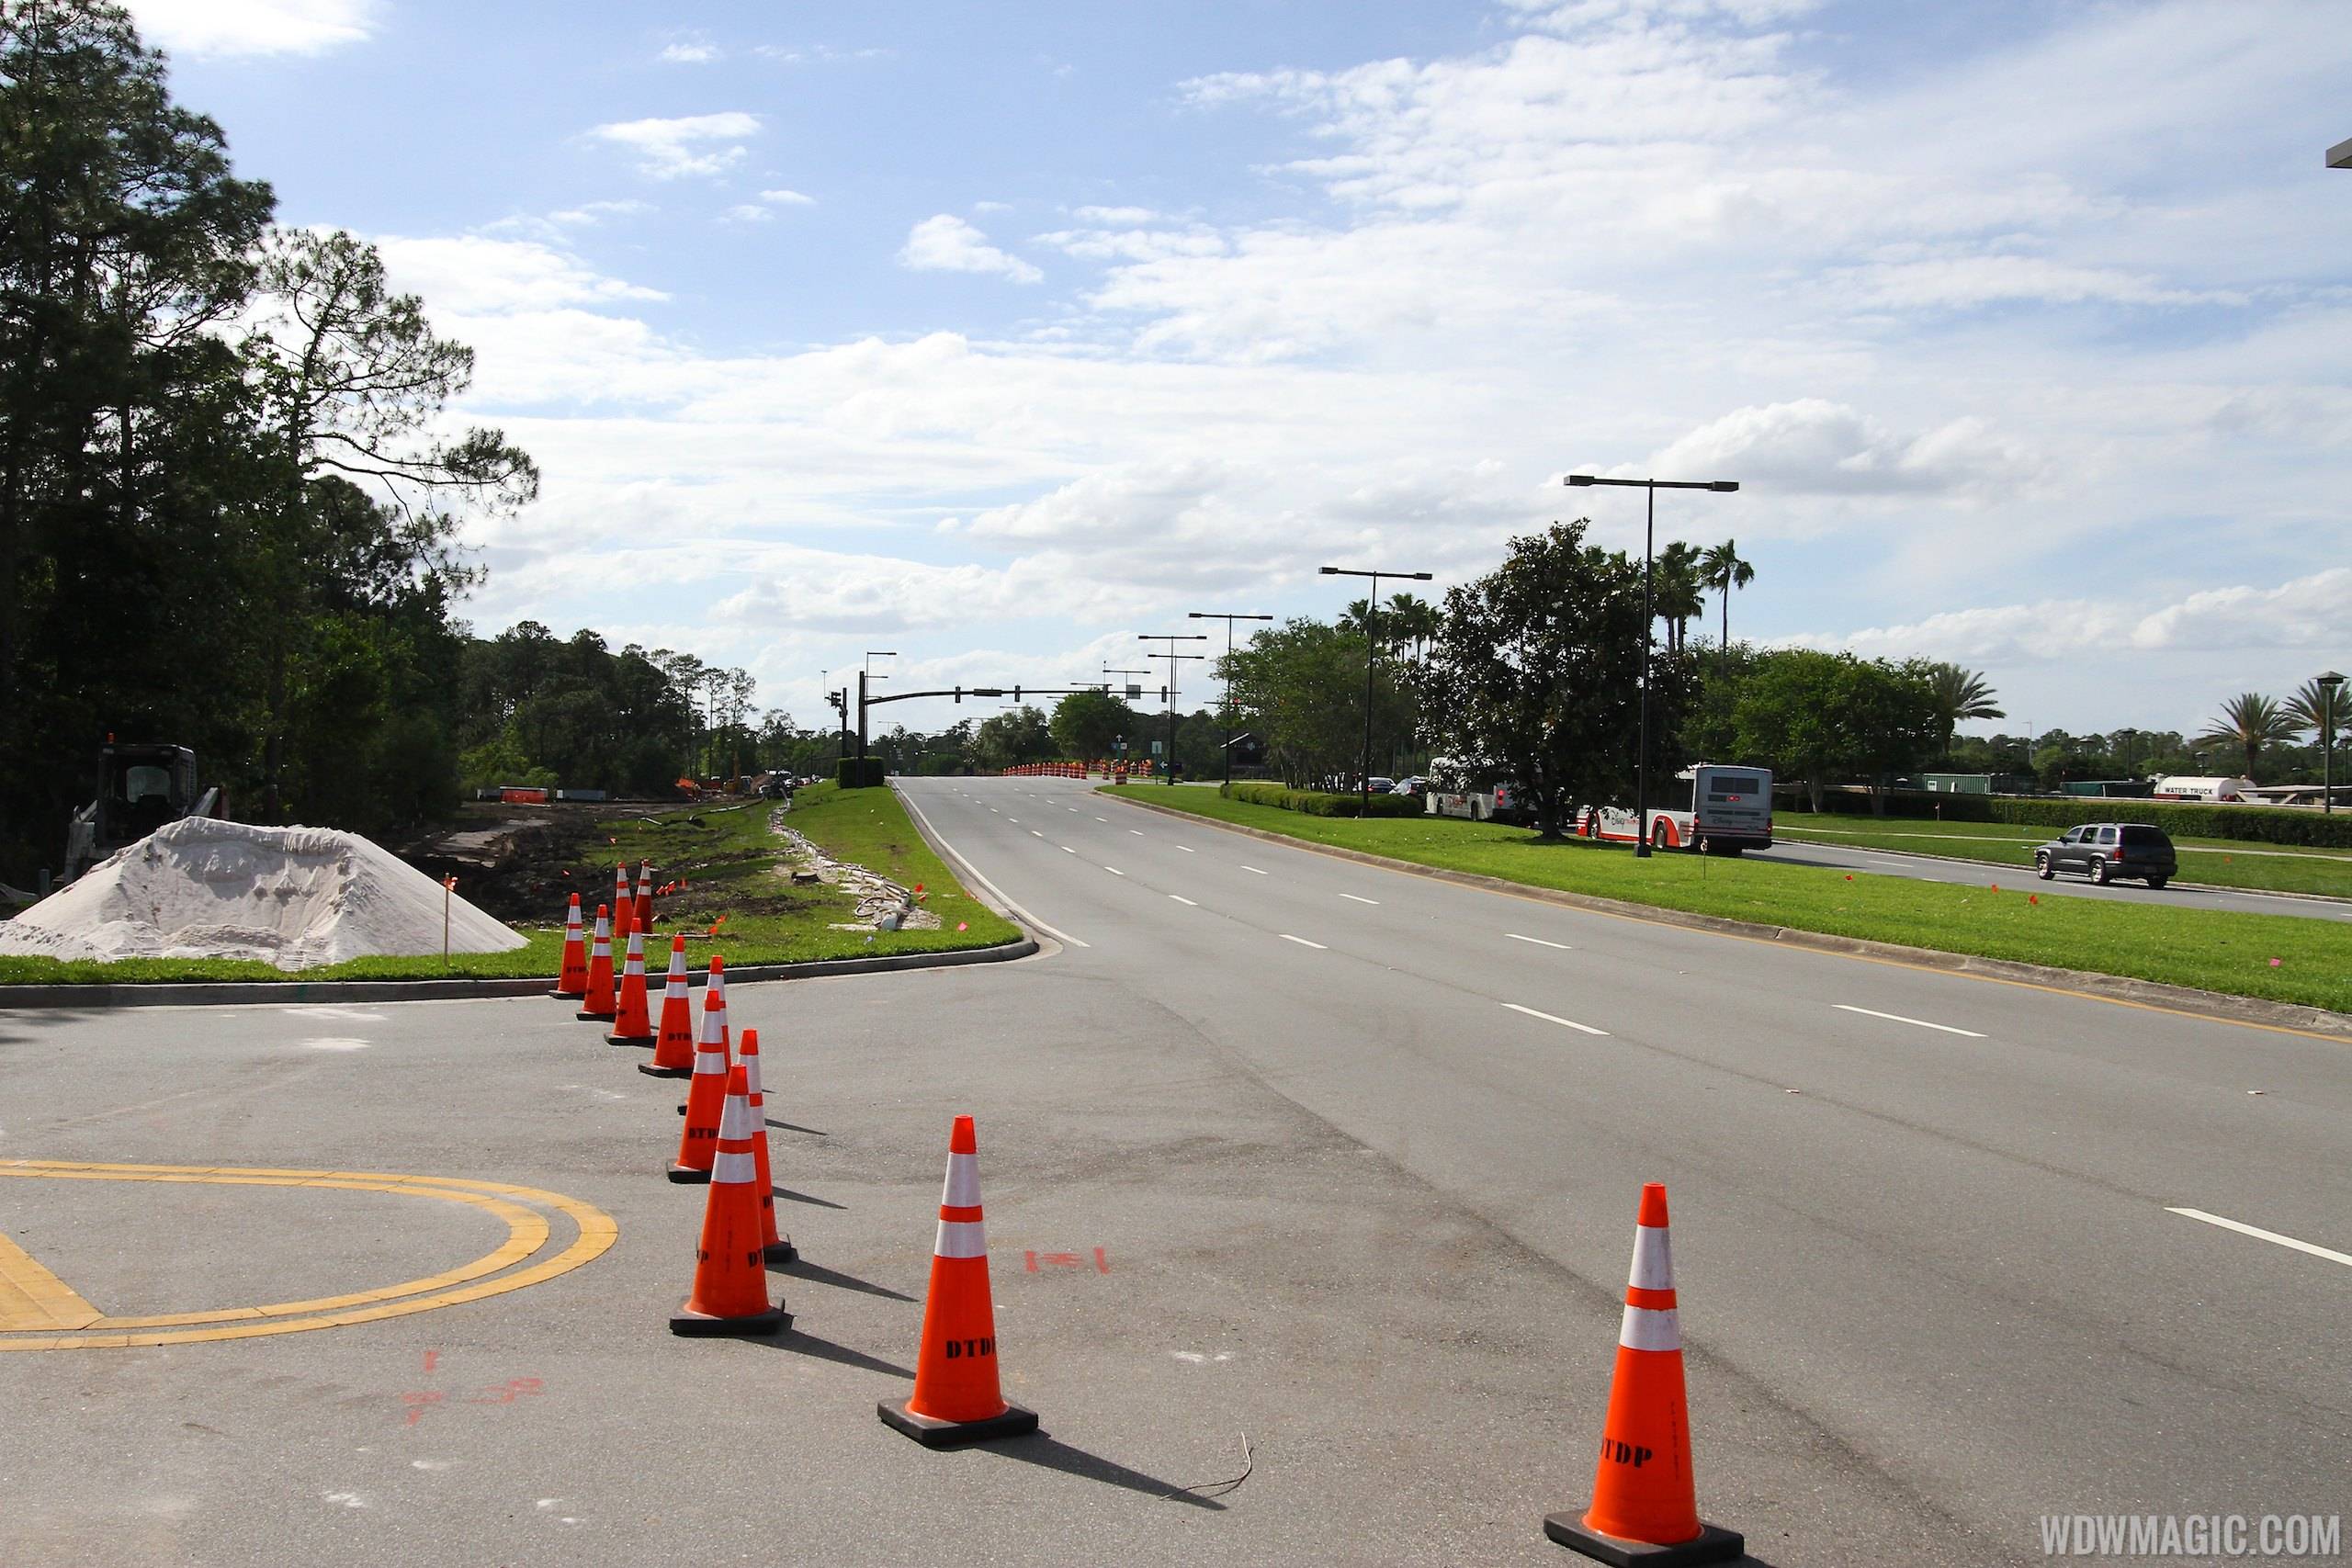 PHOTOS - Work well underway on the Buena Vista Drive expansion for Disney Springs